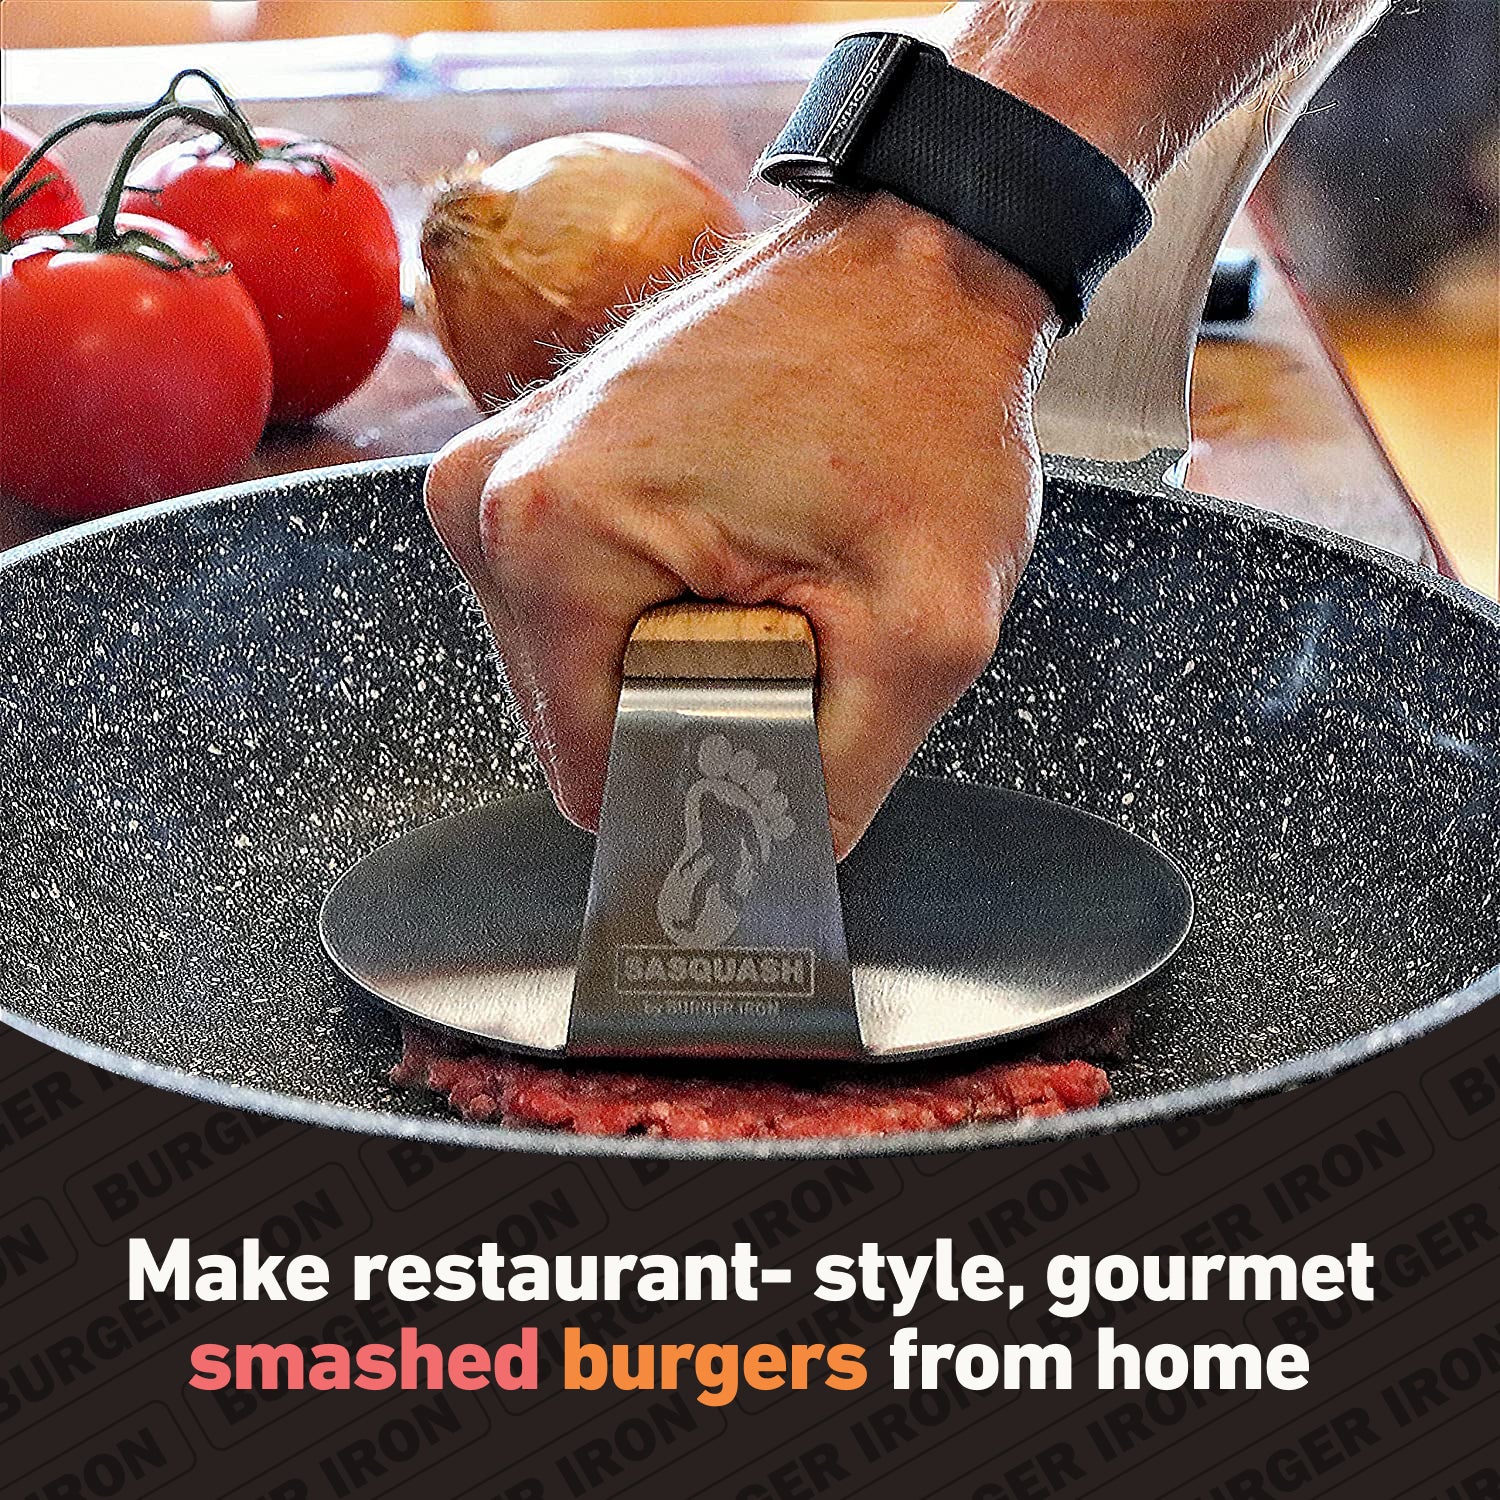 The Burger Smasher | Cast Iron Burger Press - Perfect Thin Patty Burgers  with Smasher Tool to Cook at Home | Great Holiday Gift!